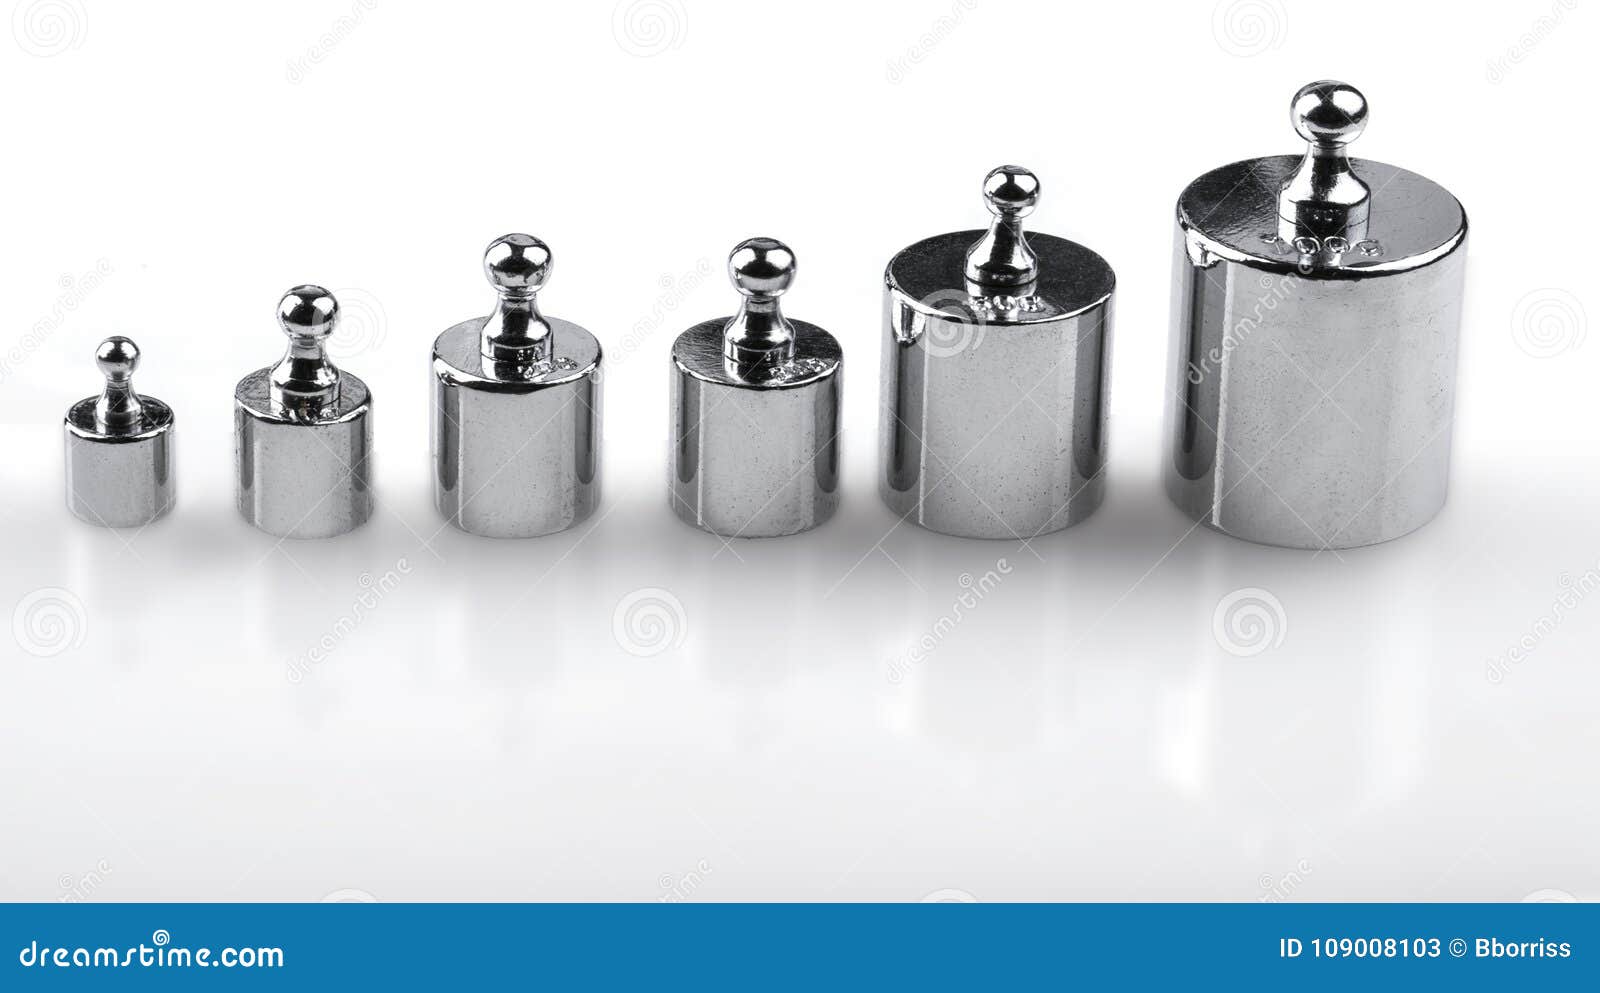 https://thumbs.dreamstime.com/z/weights-laboratory-scales-white-background-weights-laboratory-scales-white-background-109008103.jpg